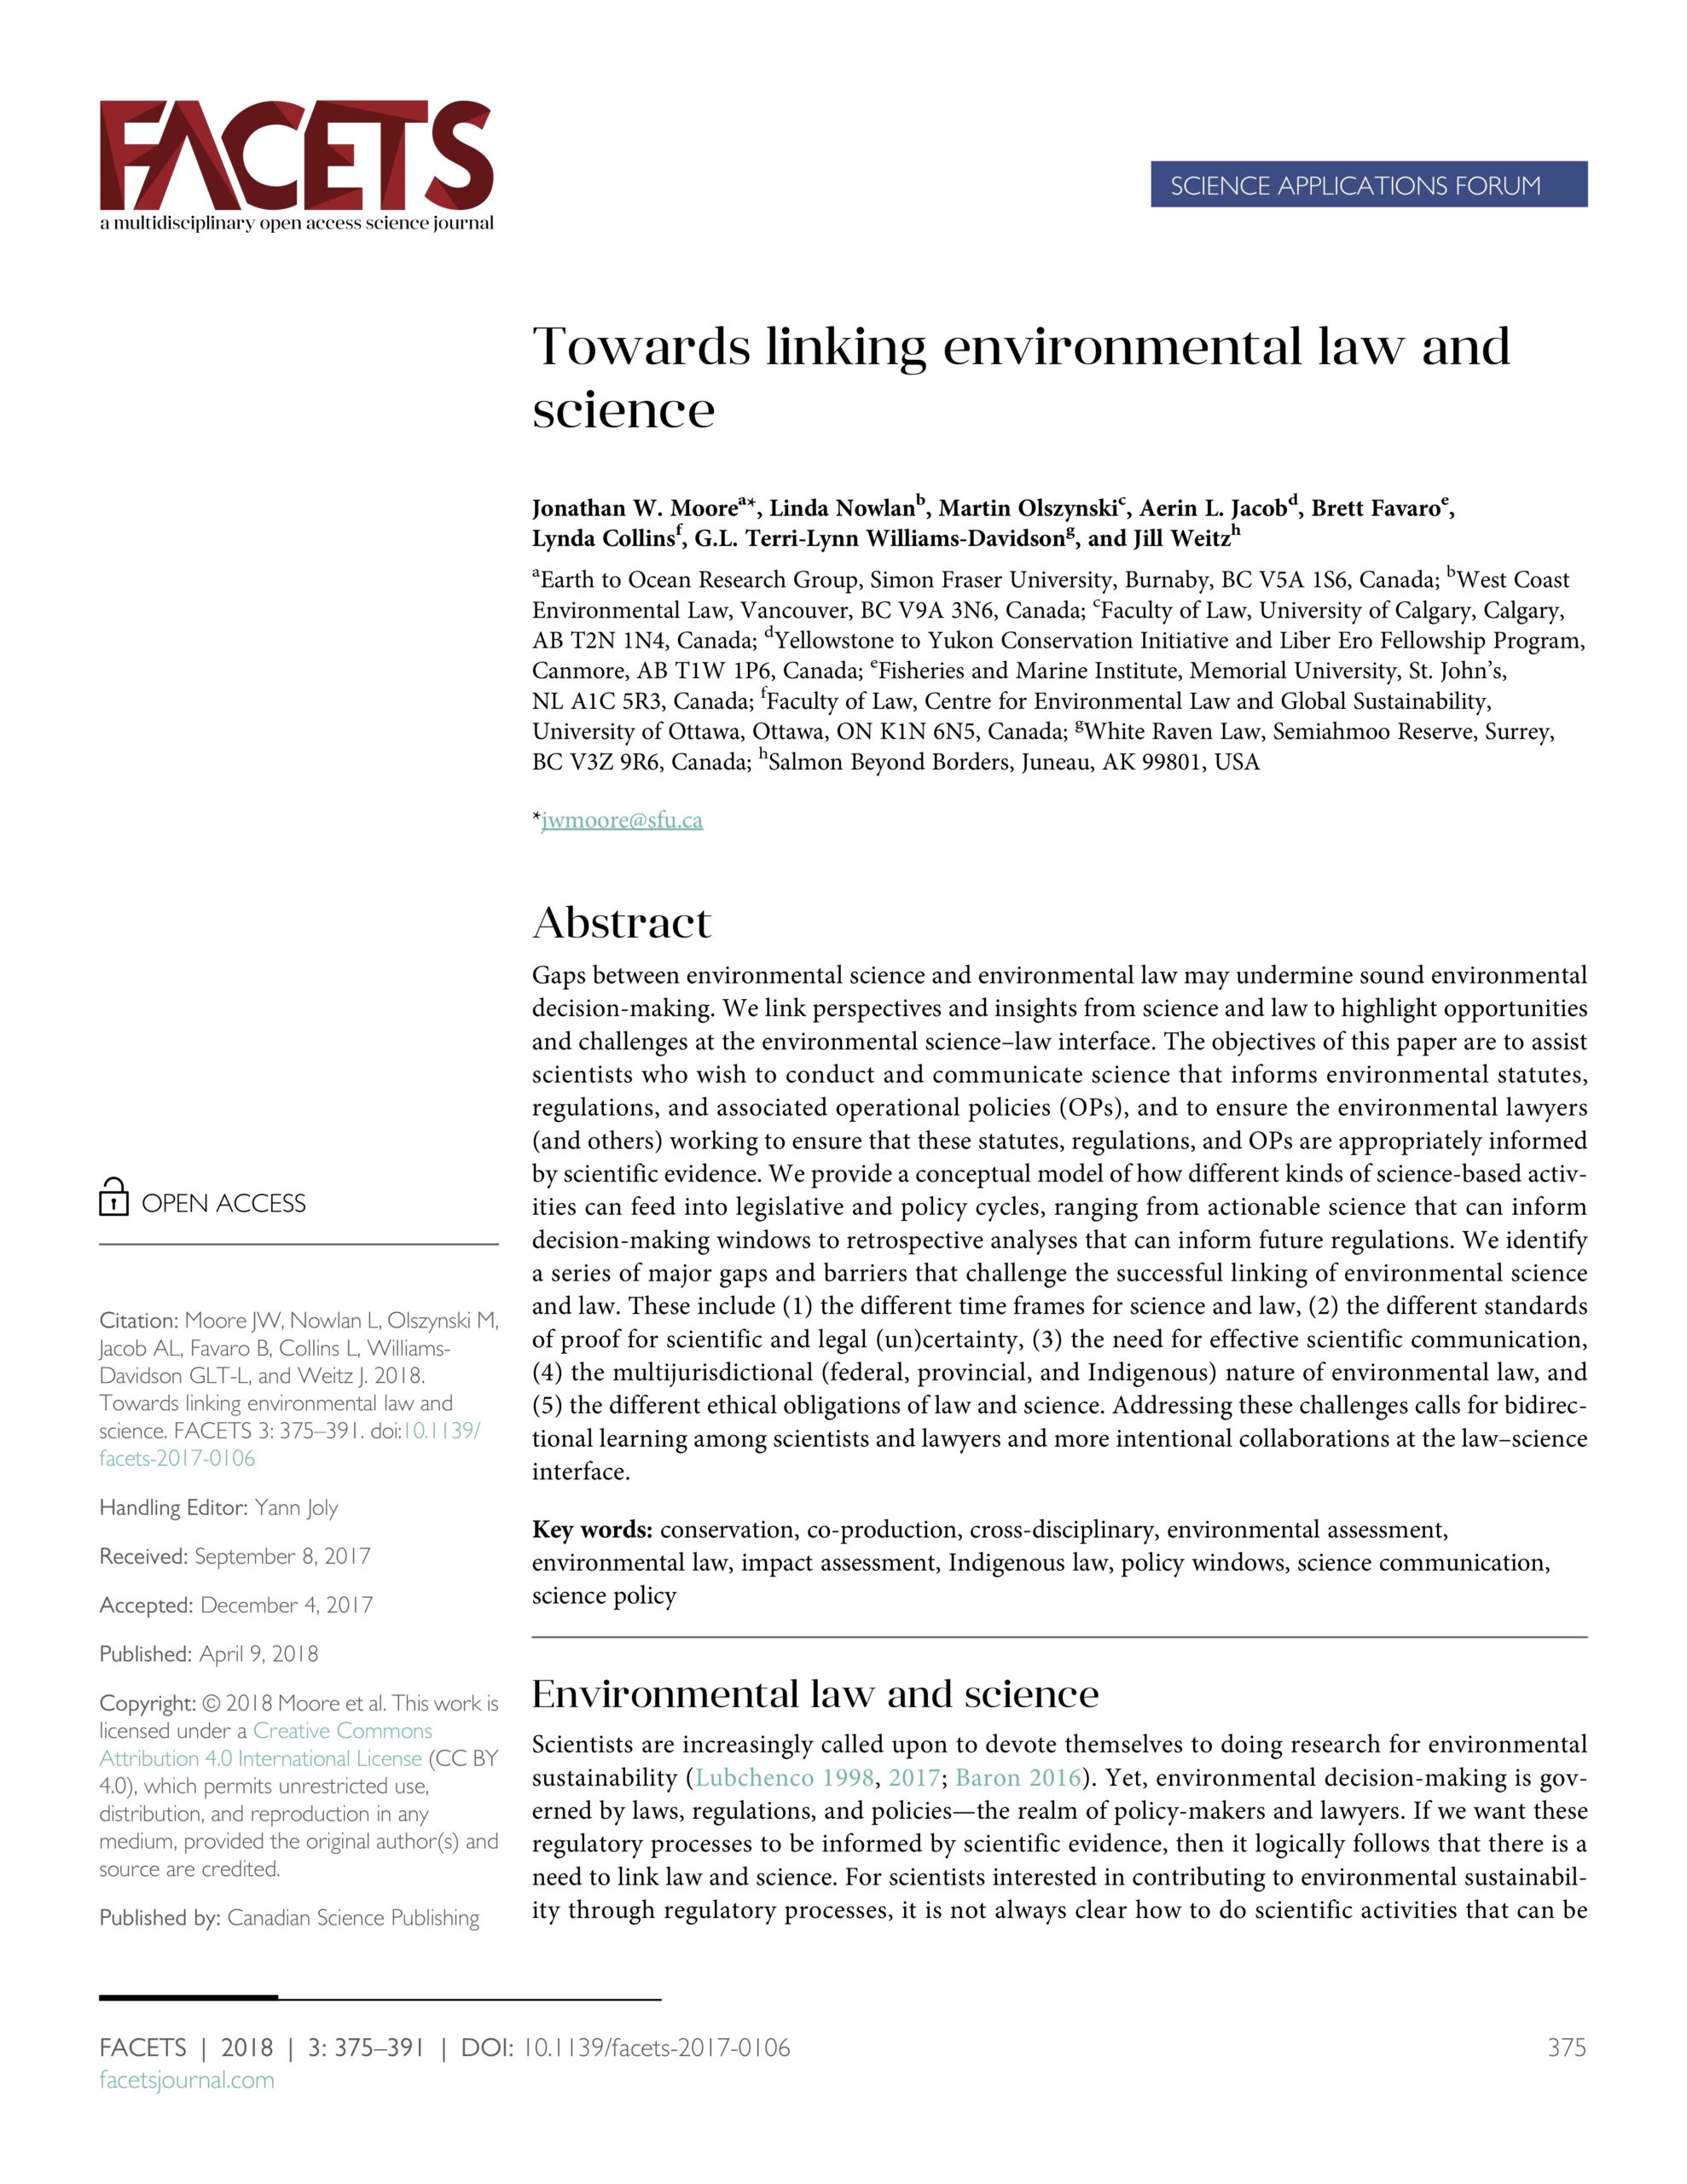 Moore et al. 2018: Towards linking environmental law and science